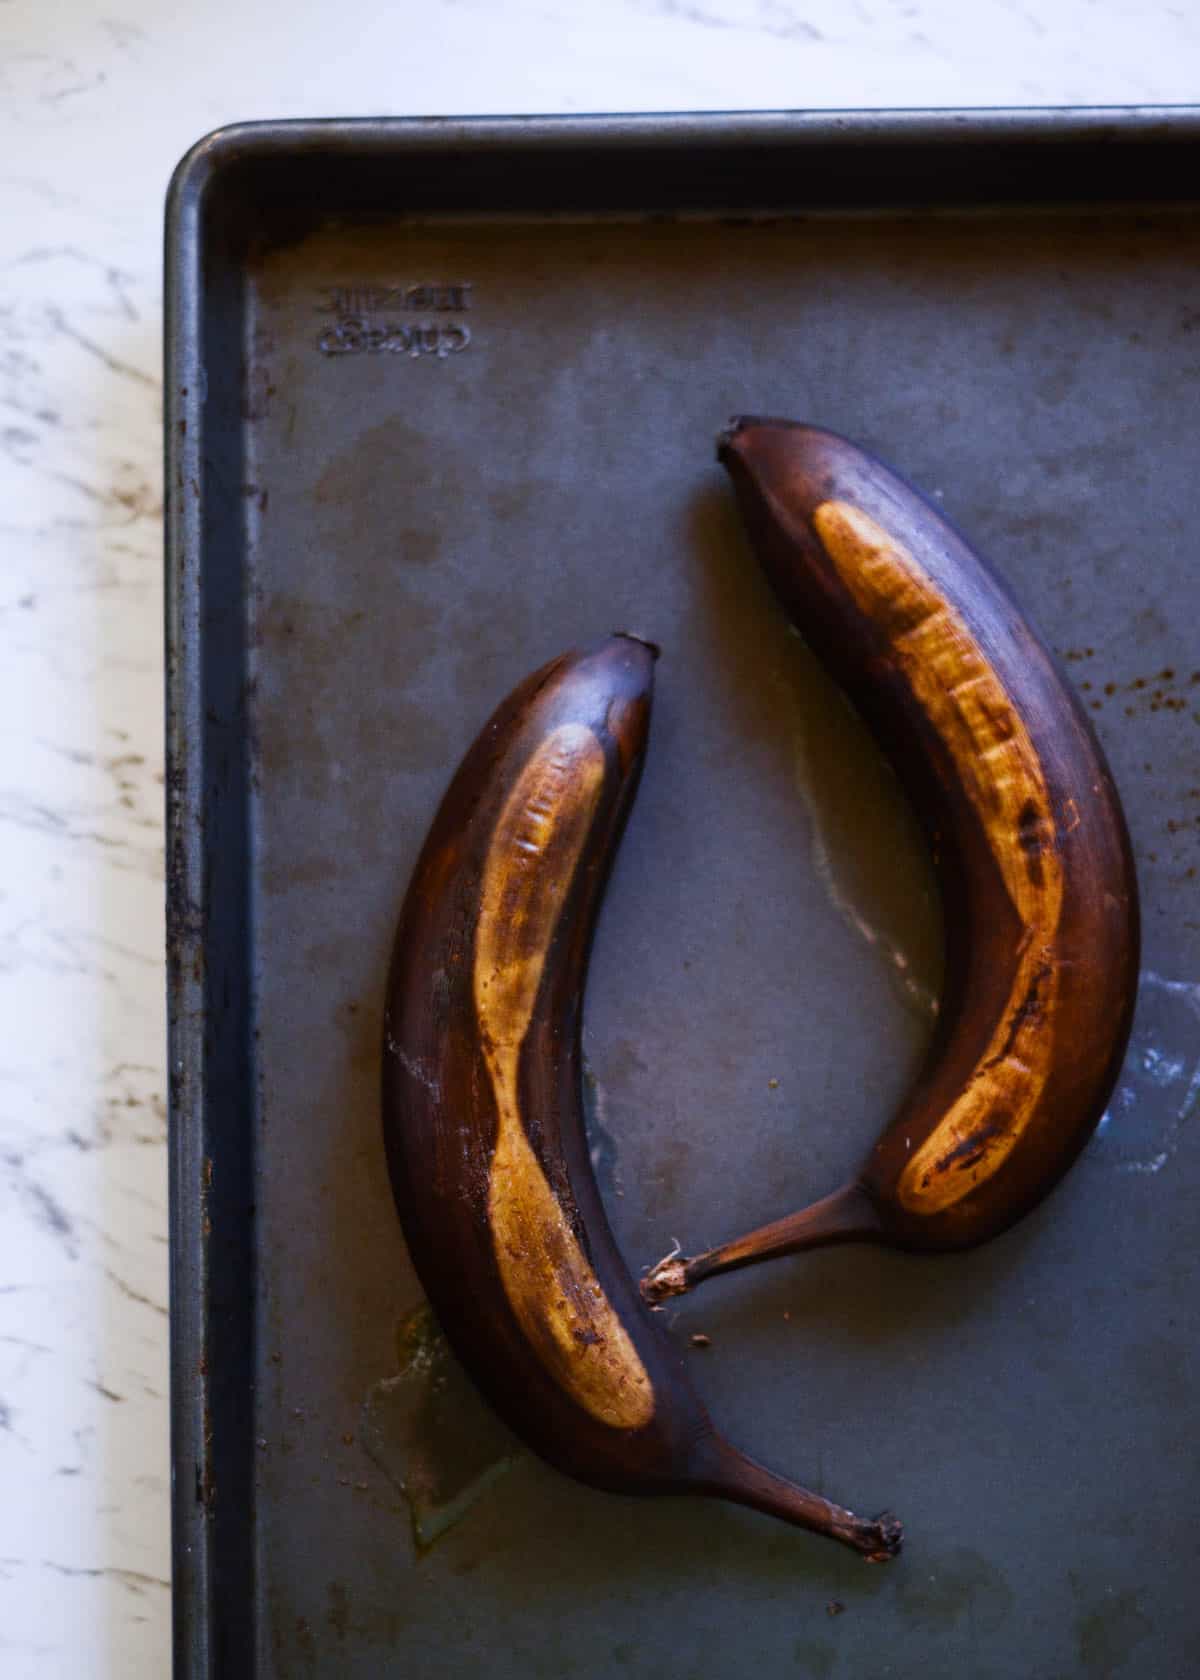 Fully brown and black bananas on a cookie sheet.